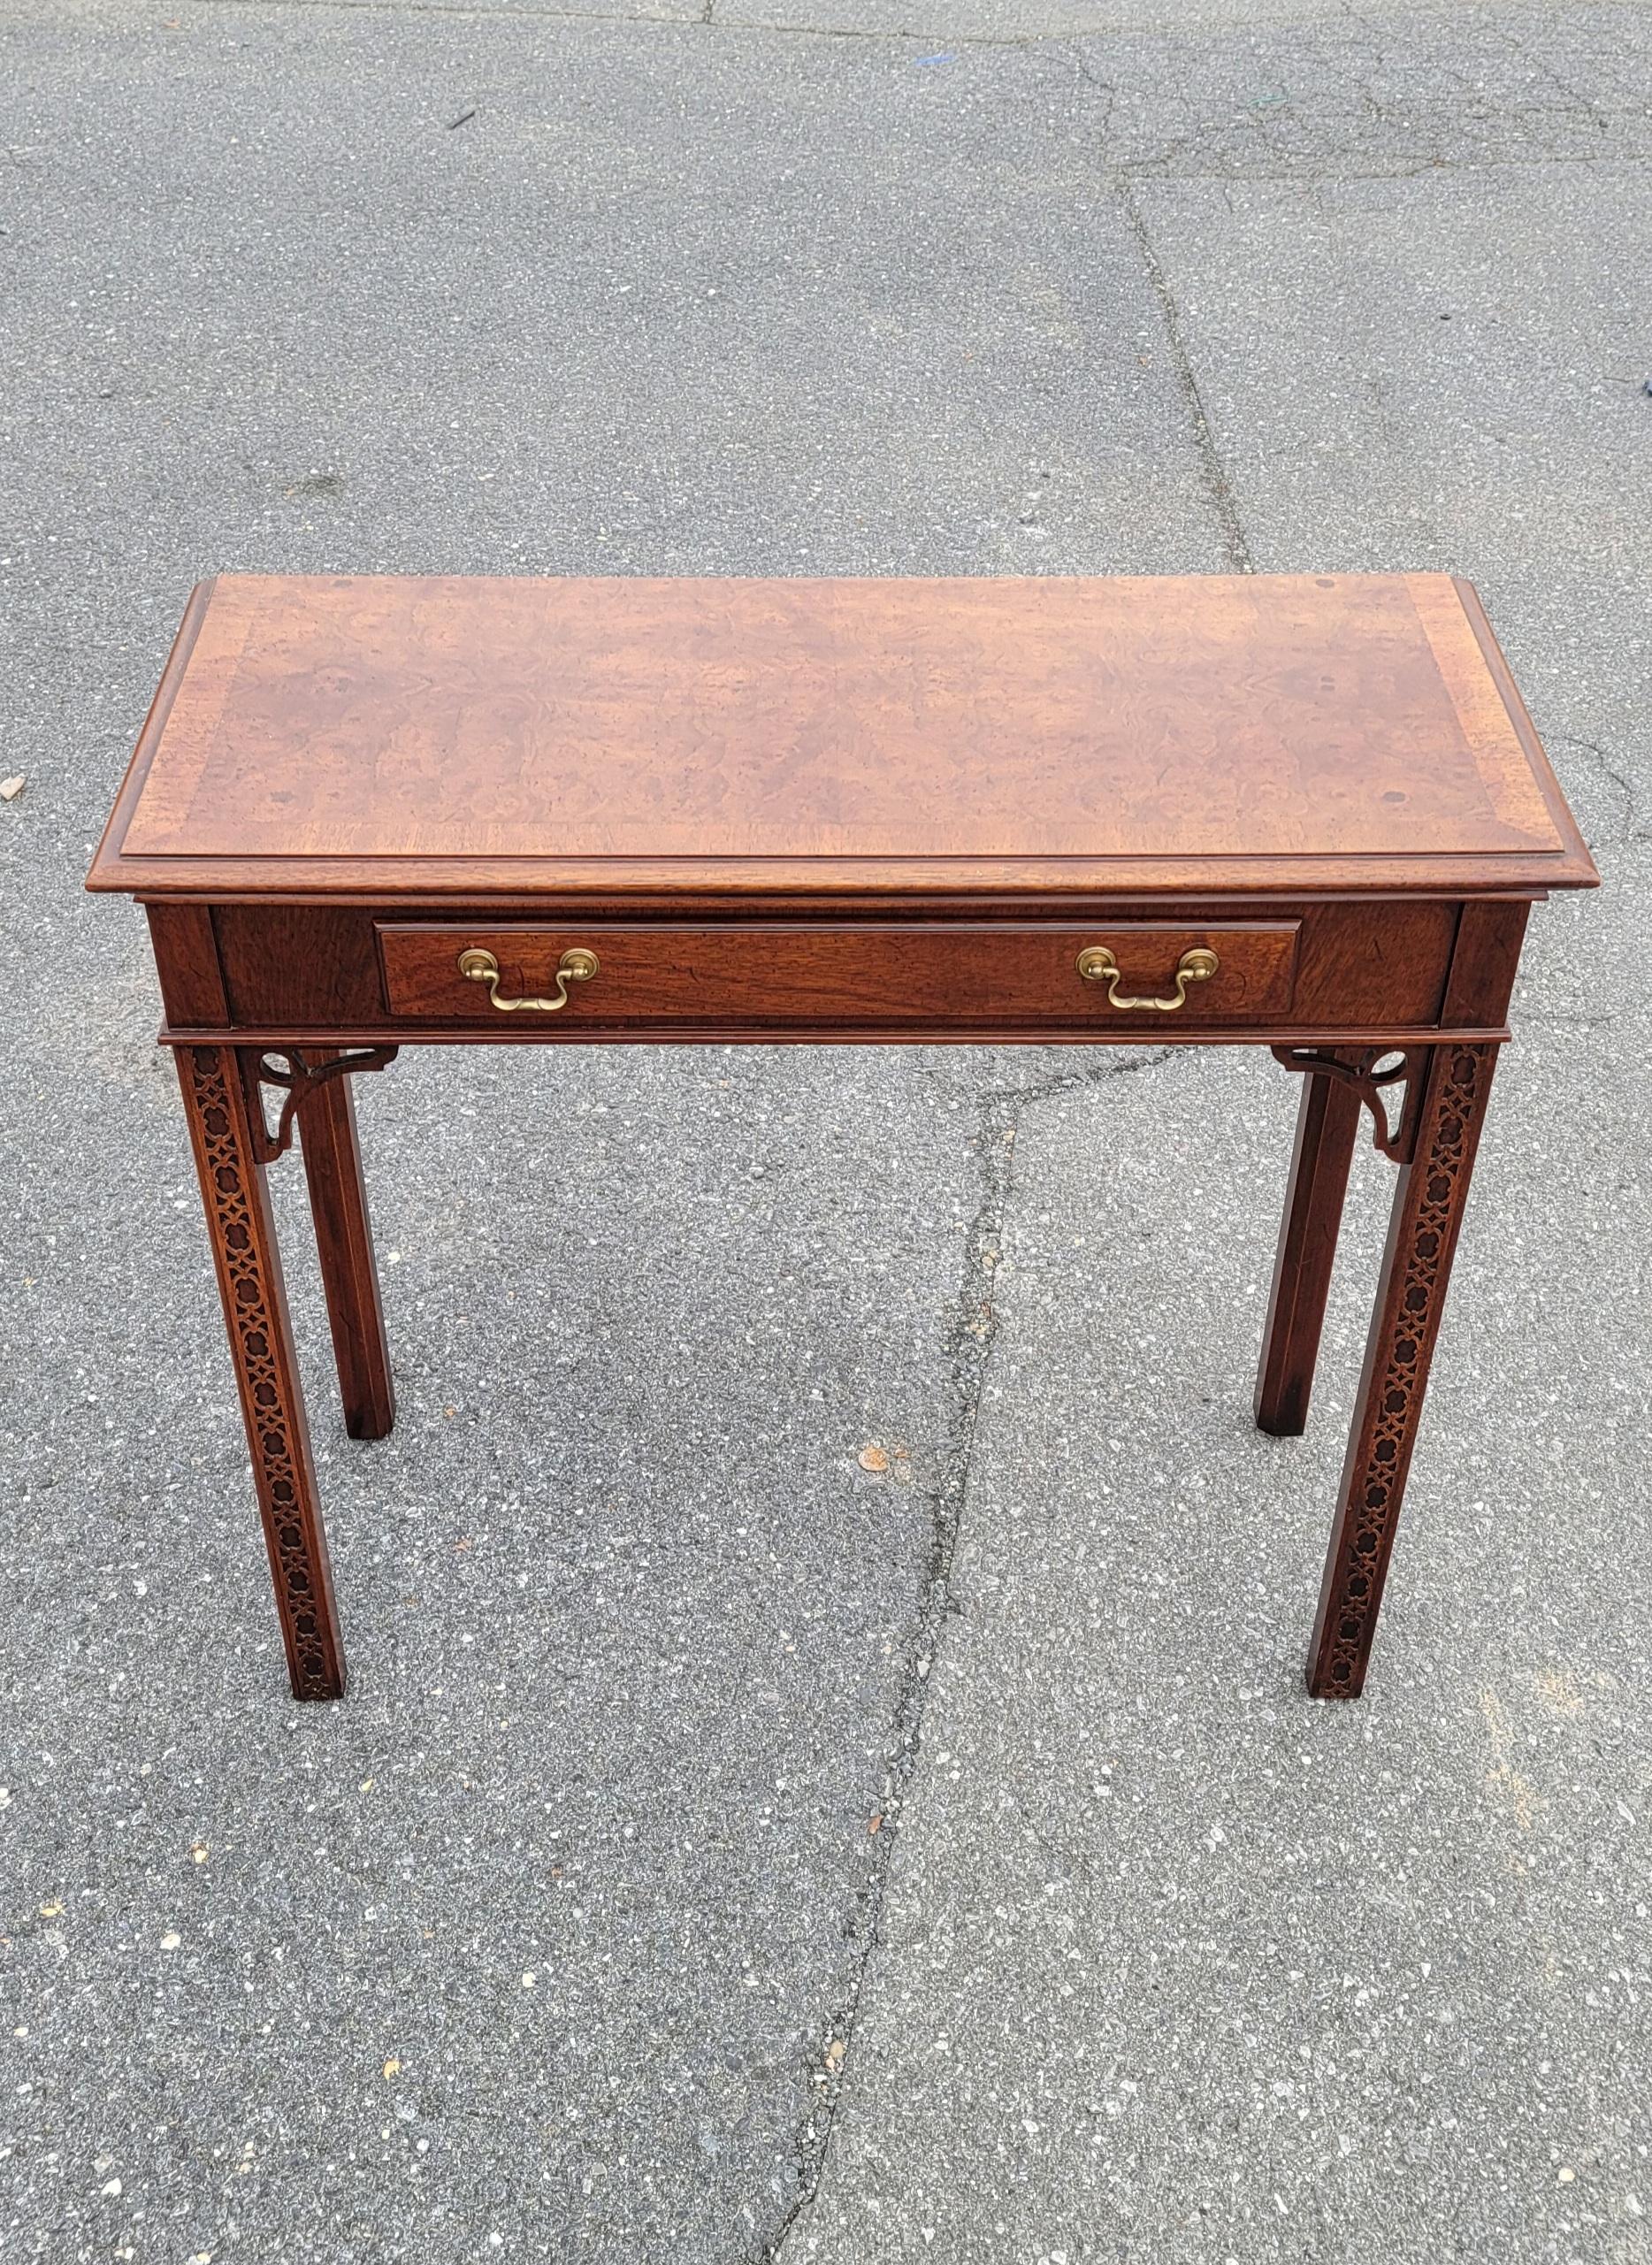 1970s Chippendale Walnut Burl Console Table with Fretwork and Banded Top For Sale 8